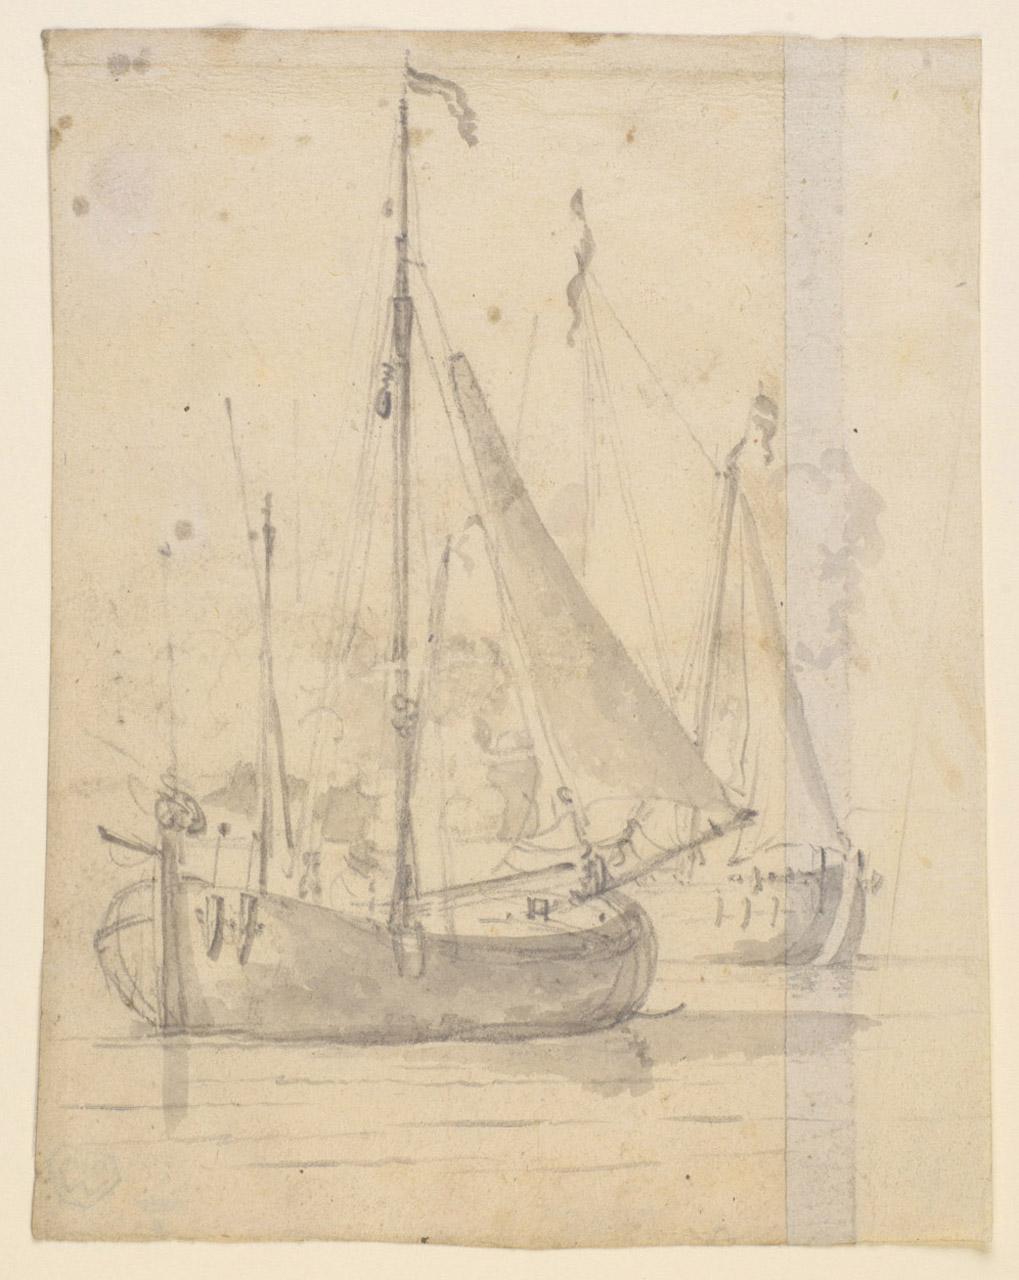 Sketch of a small boat with its 'jib', a sail on the front, out